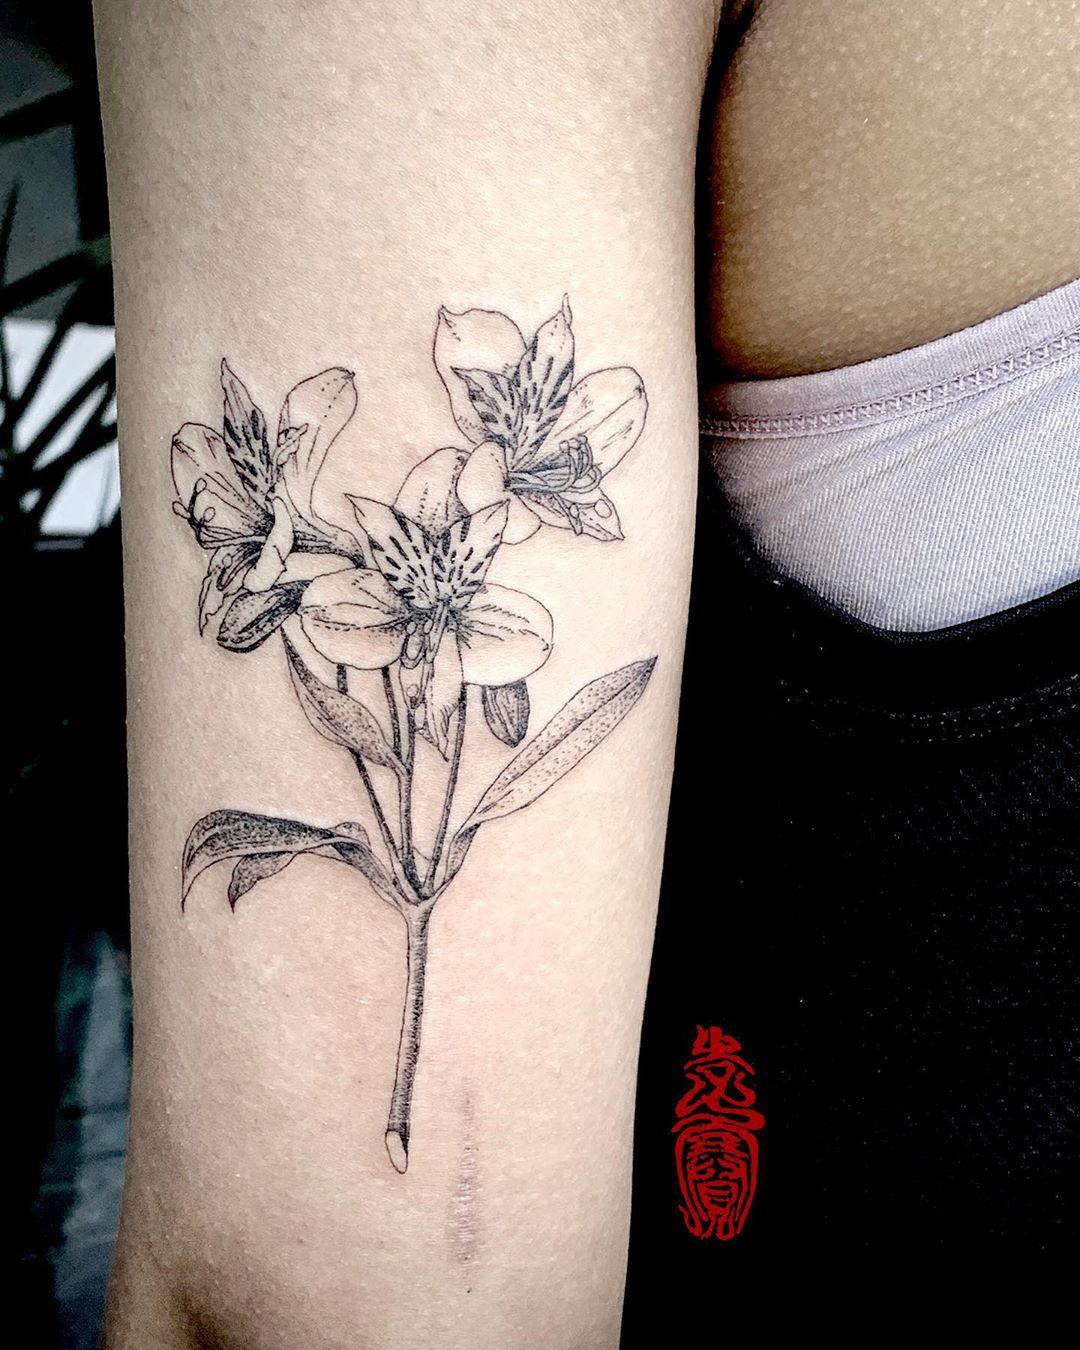 Black Peruvian Lily tattoo design on the arm of a girl